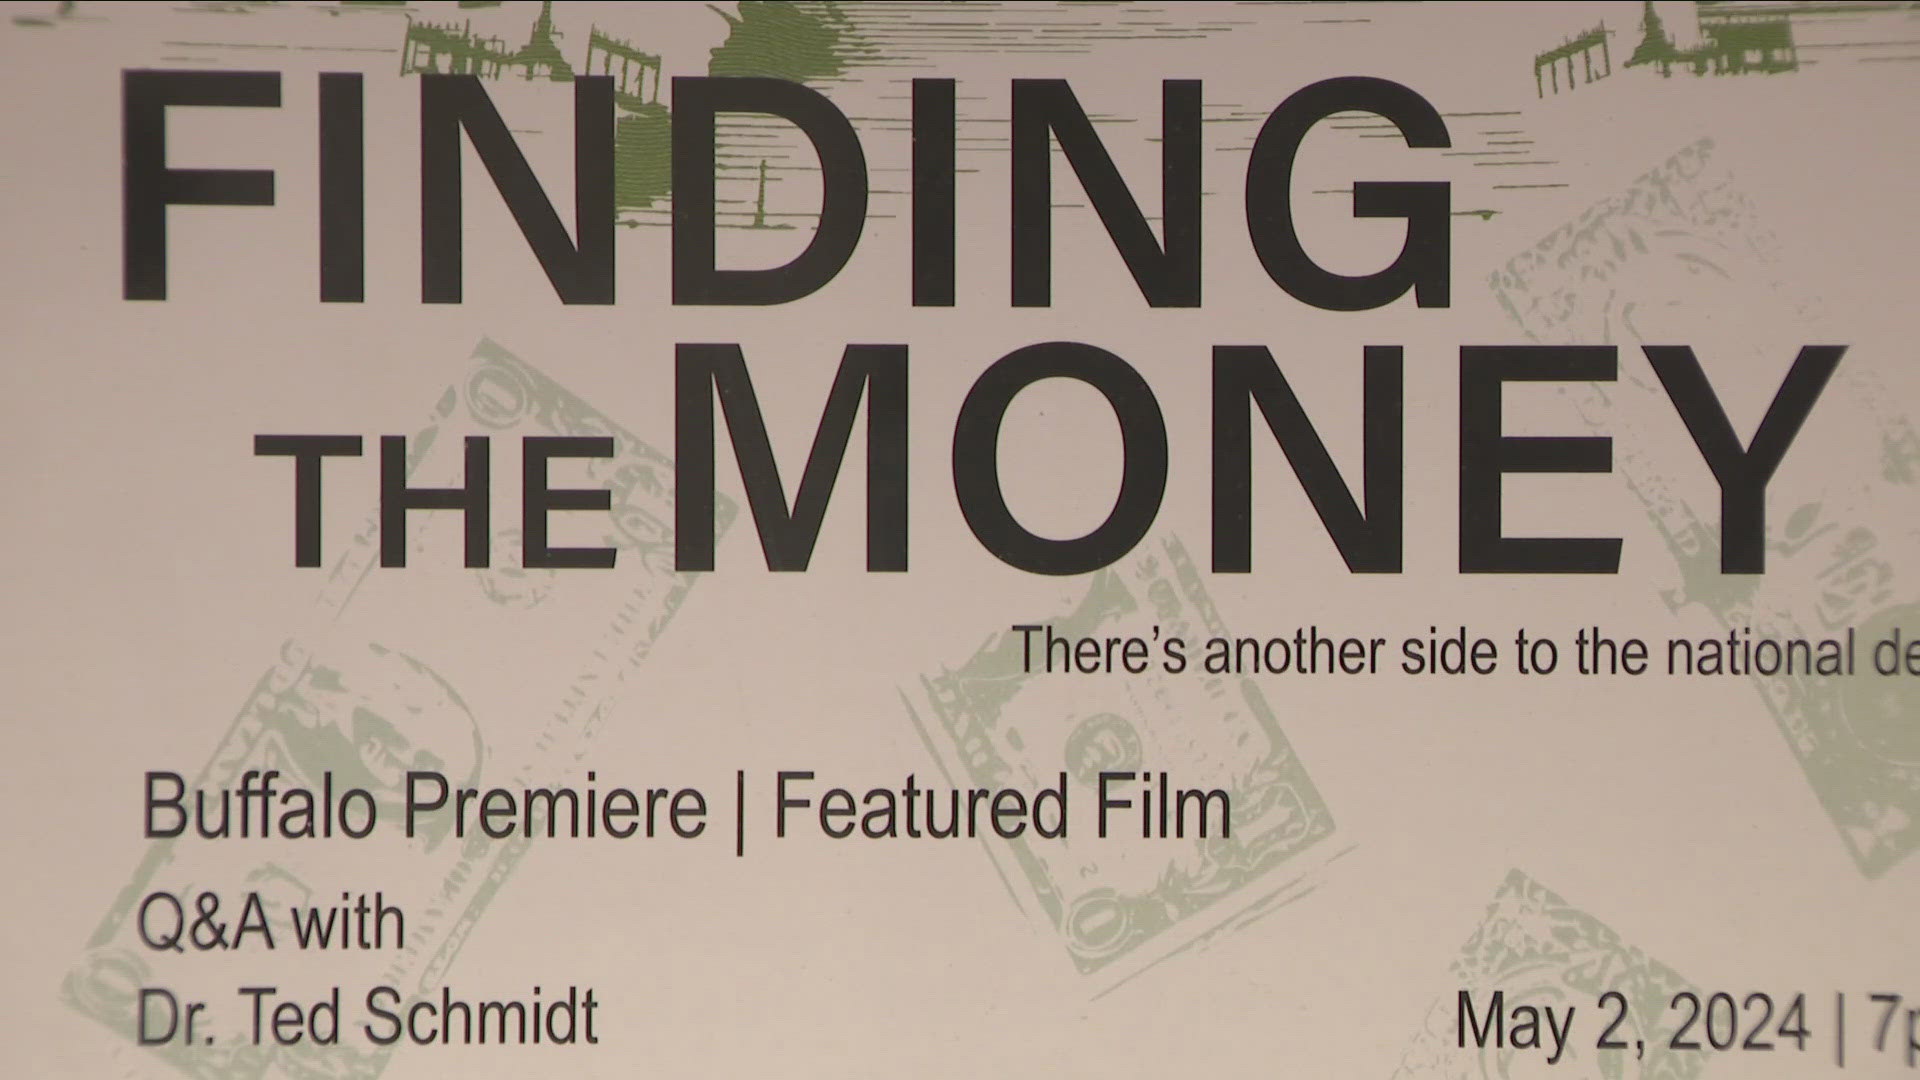 The award winning documentary looks at government finances in a new way.